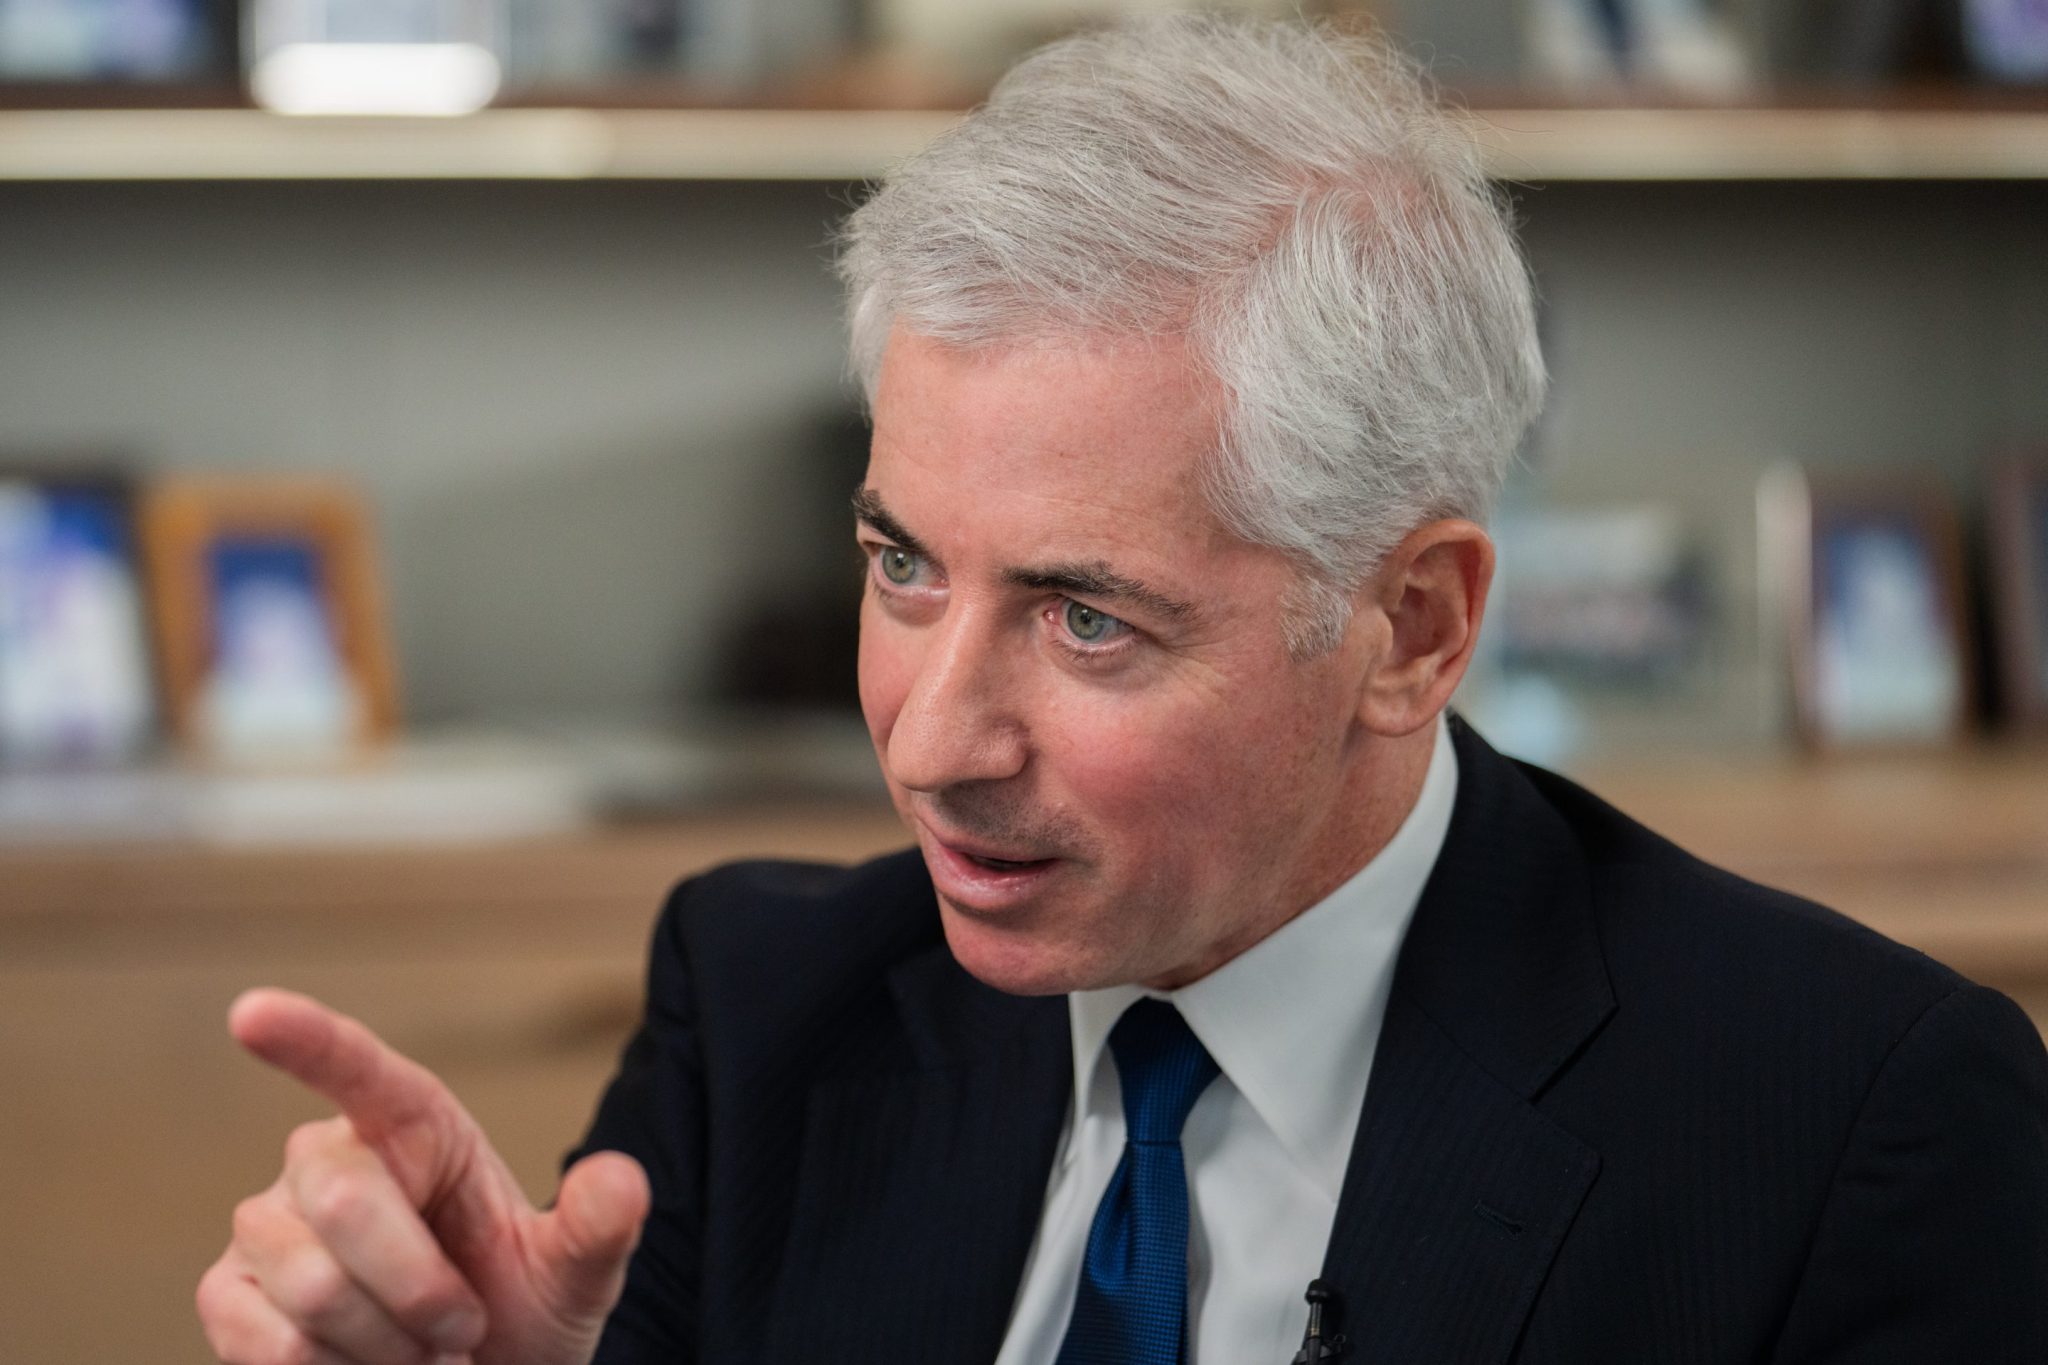 Billionaire Bill Ackman argues his antisemitism crusade against Harvard is totally unrelated to his ‘unfortunate experience as a donor’